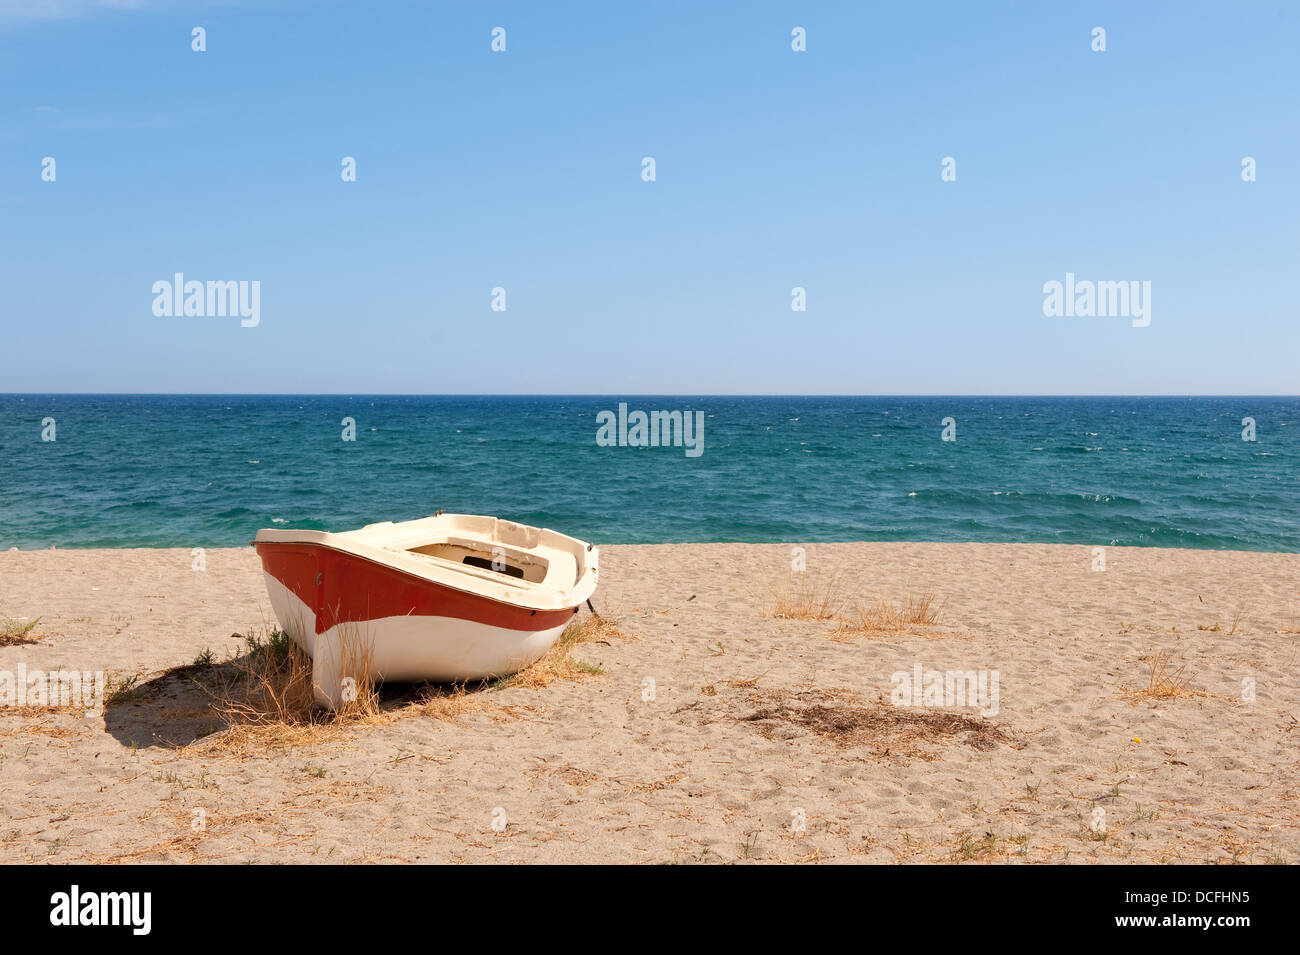 Boat on the tranquil beach Stock Photo